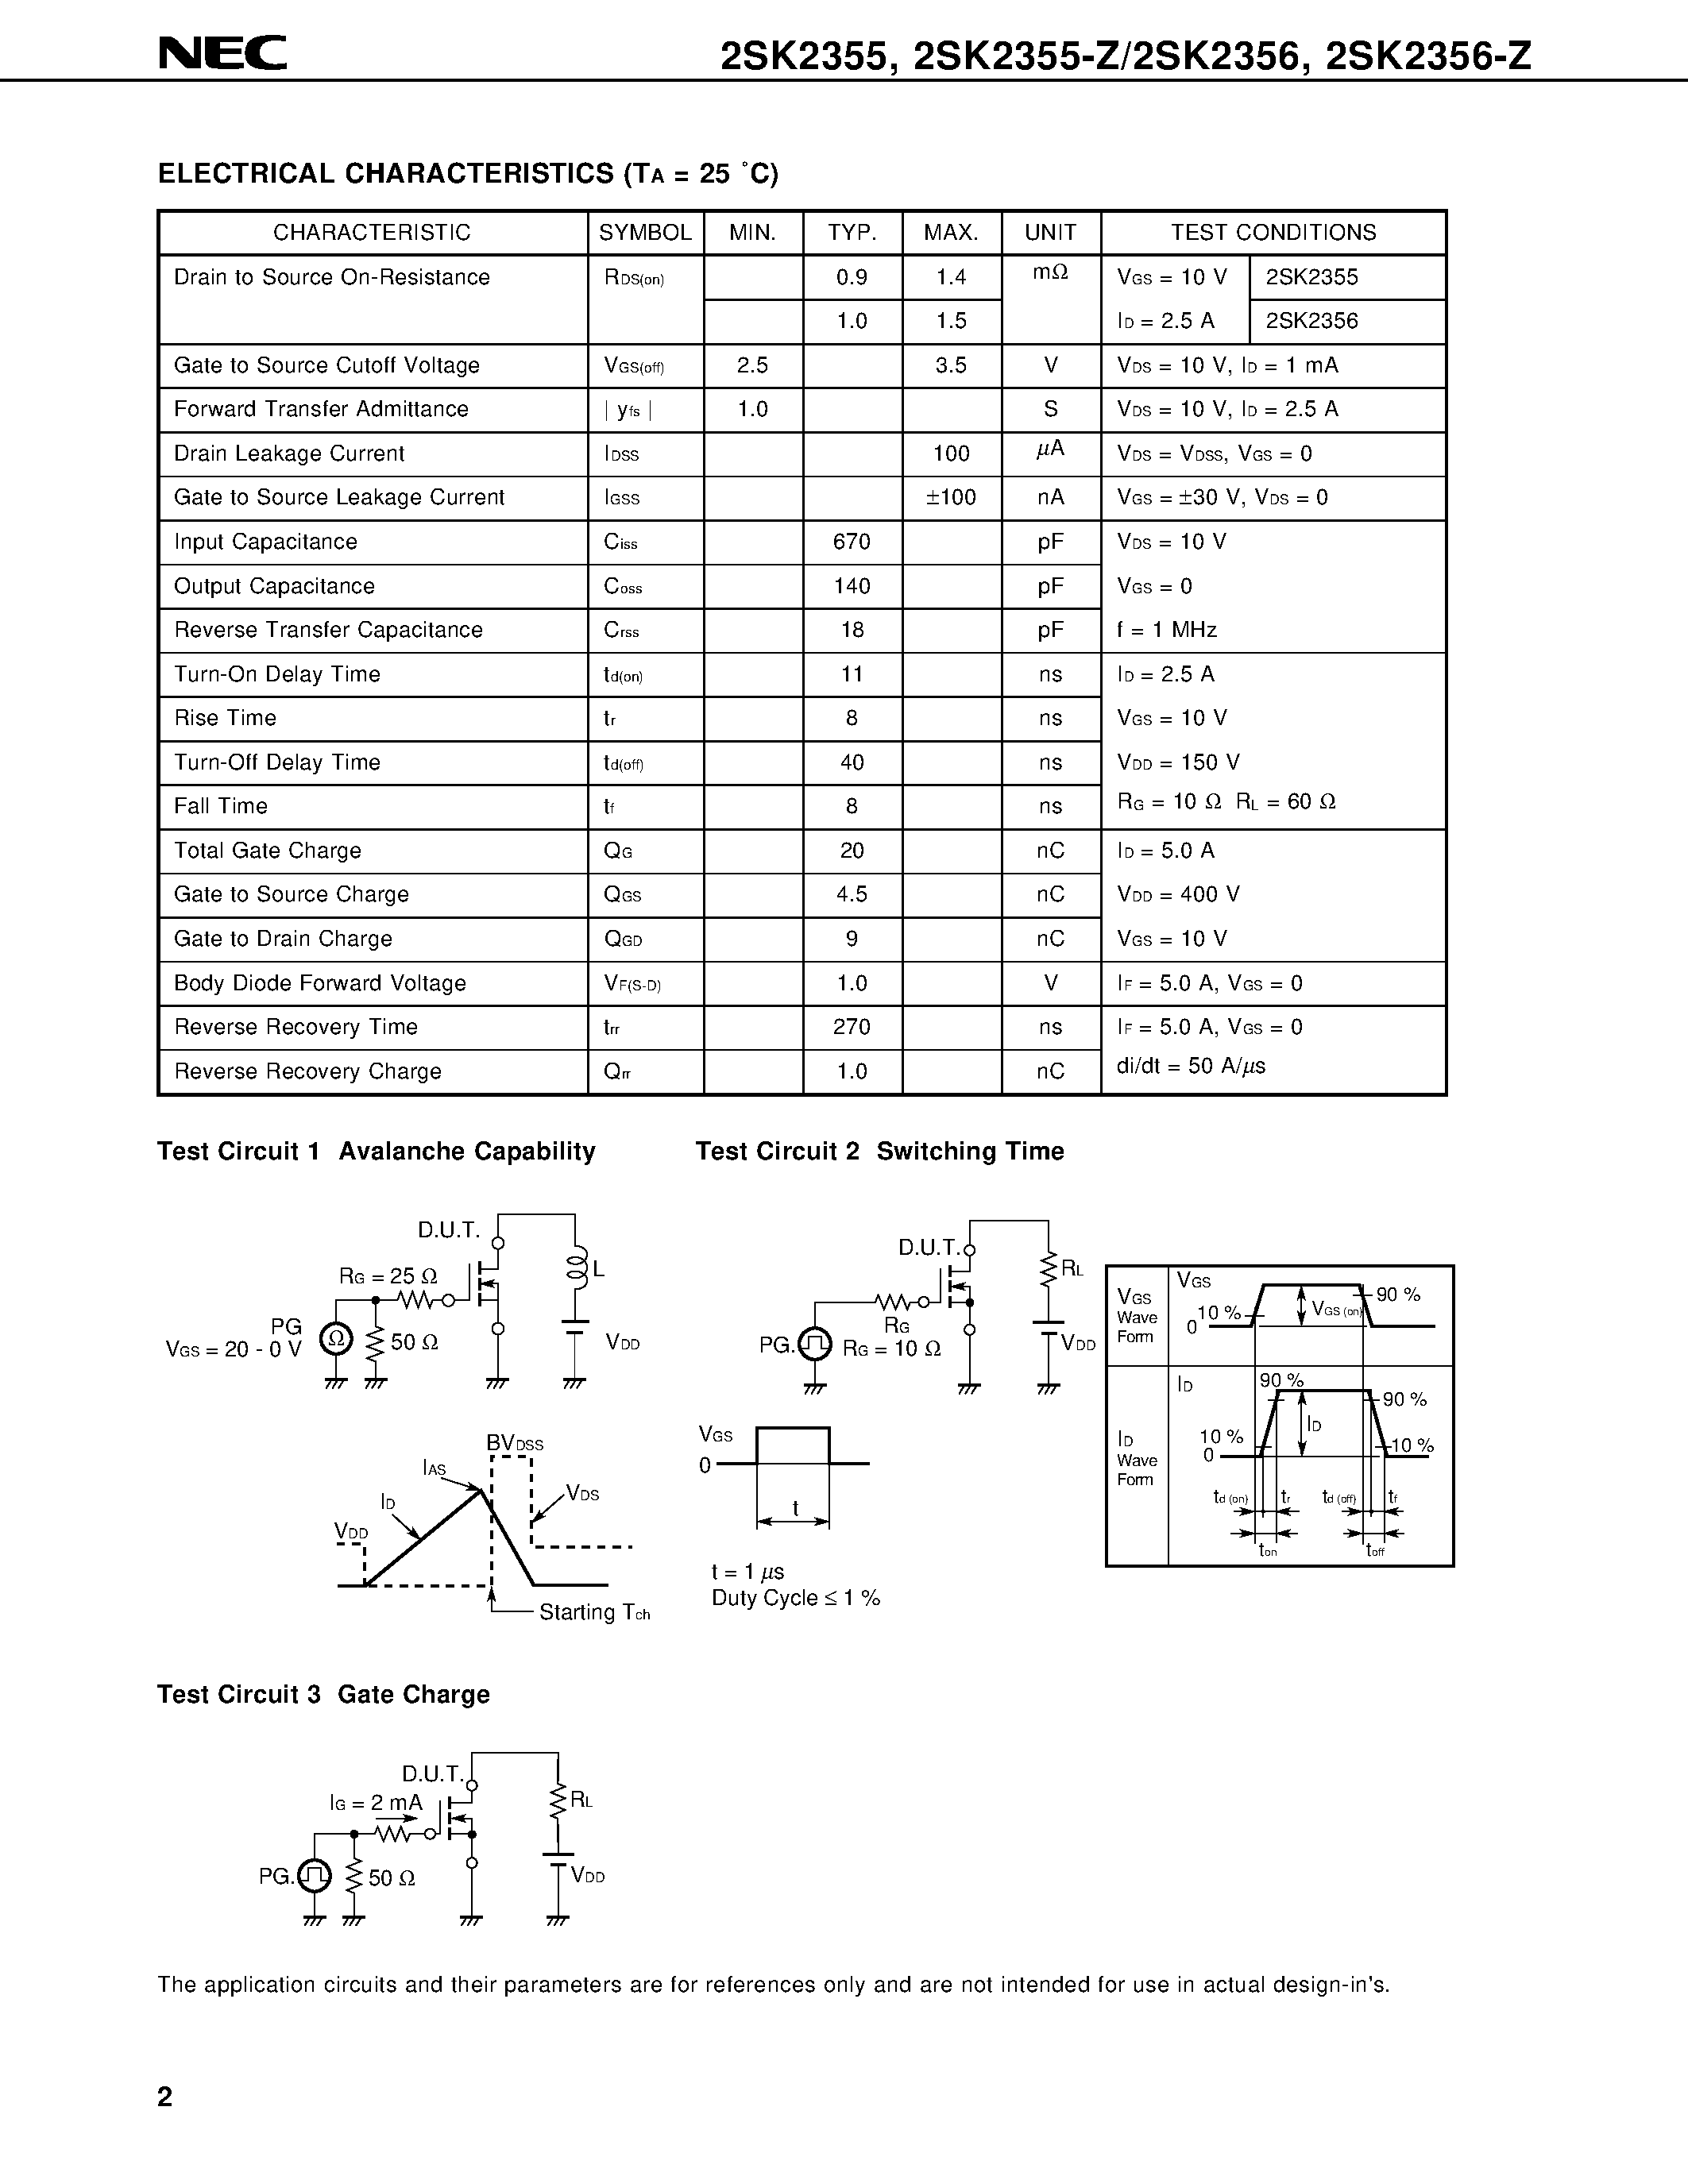 Datasheet 2SK2355-Z - SWITCHING N-CHANNEL POWER MOS FET INDUSTRIAL USE page 2